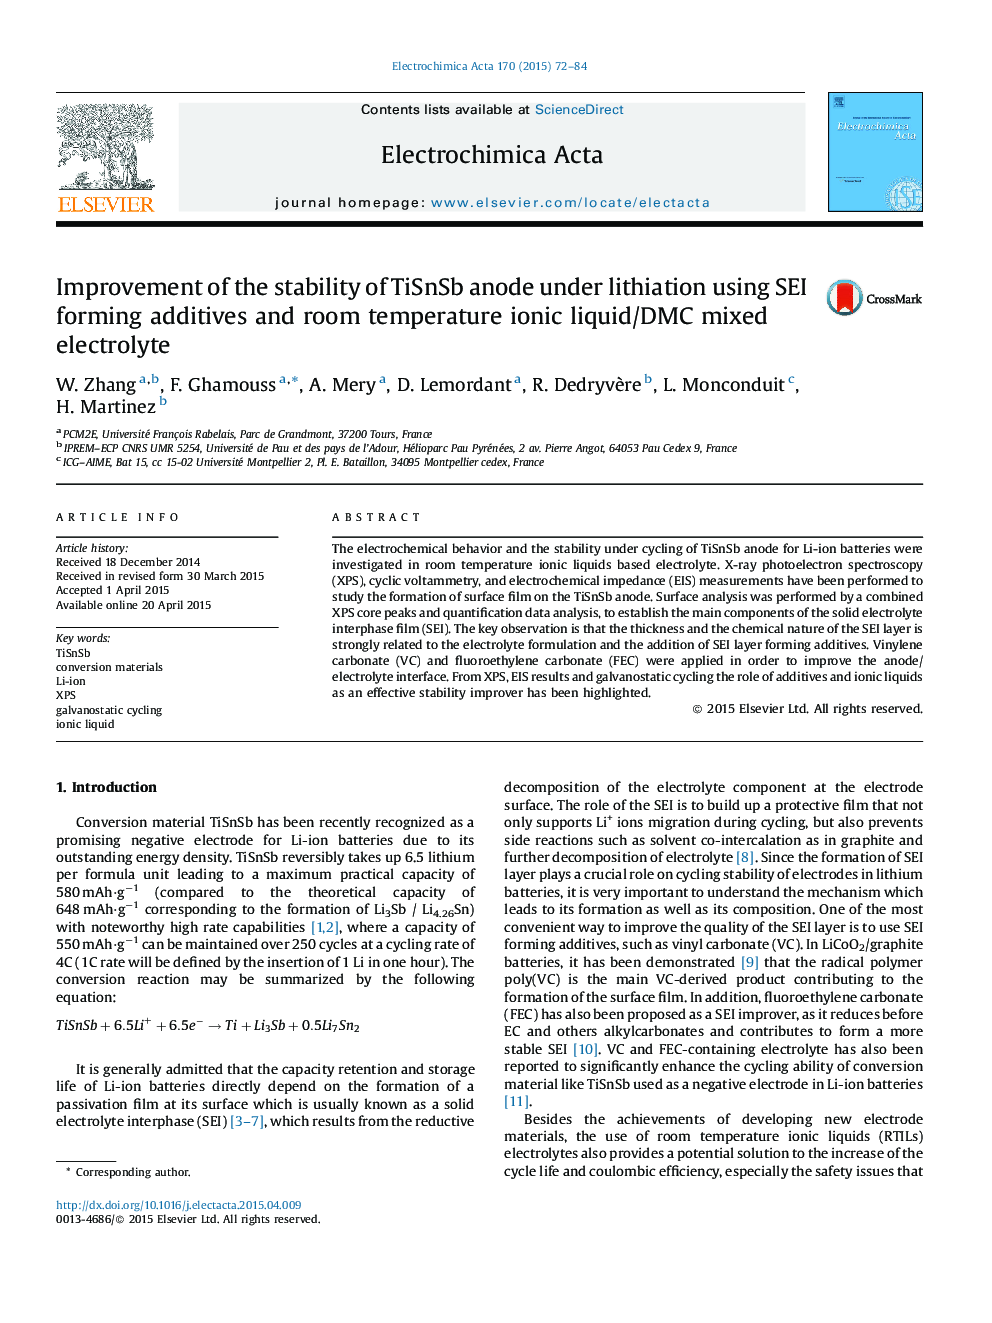 Improvement of the stability of TiSnSb anode under lithiation using SEI forming additives and room temperature ionic liquid/DMC mixed electrolyte